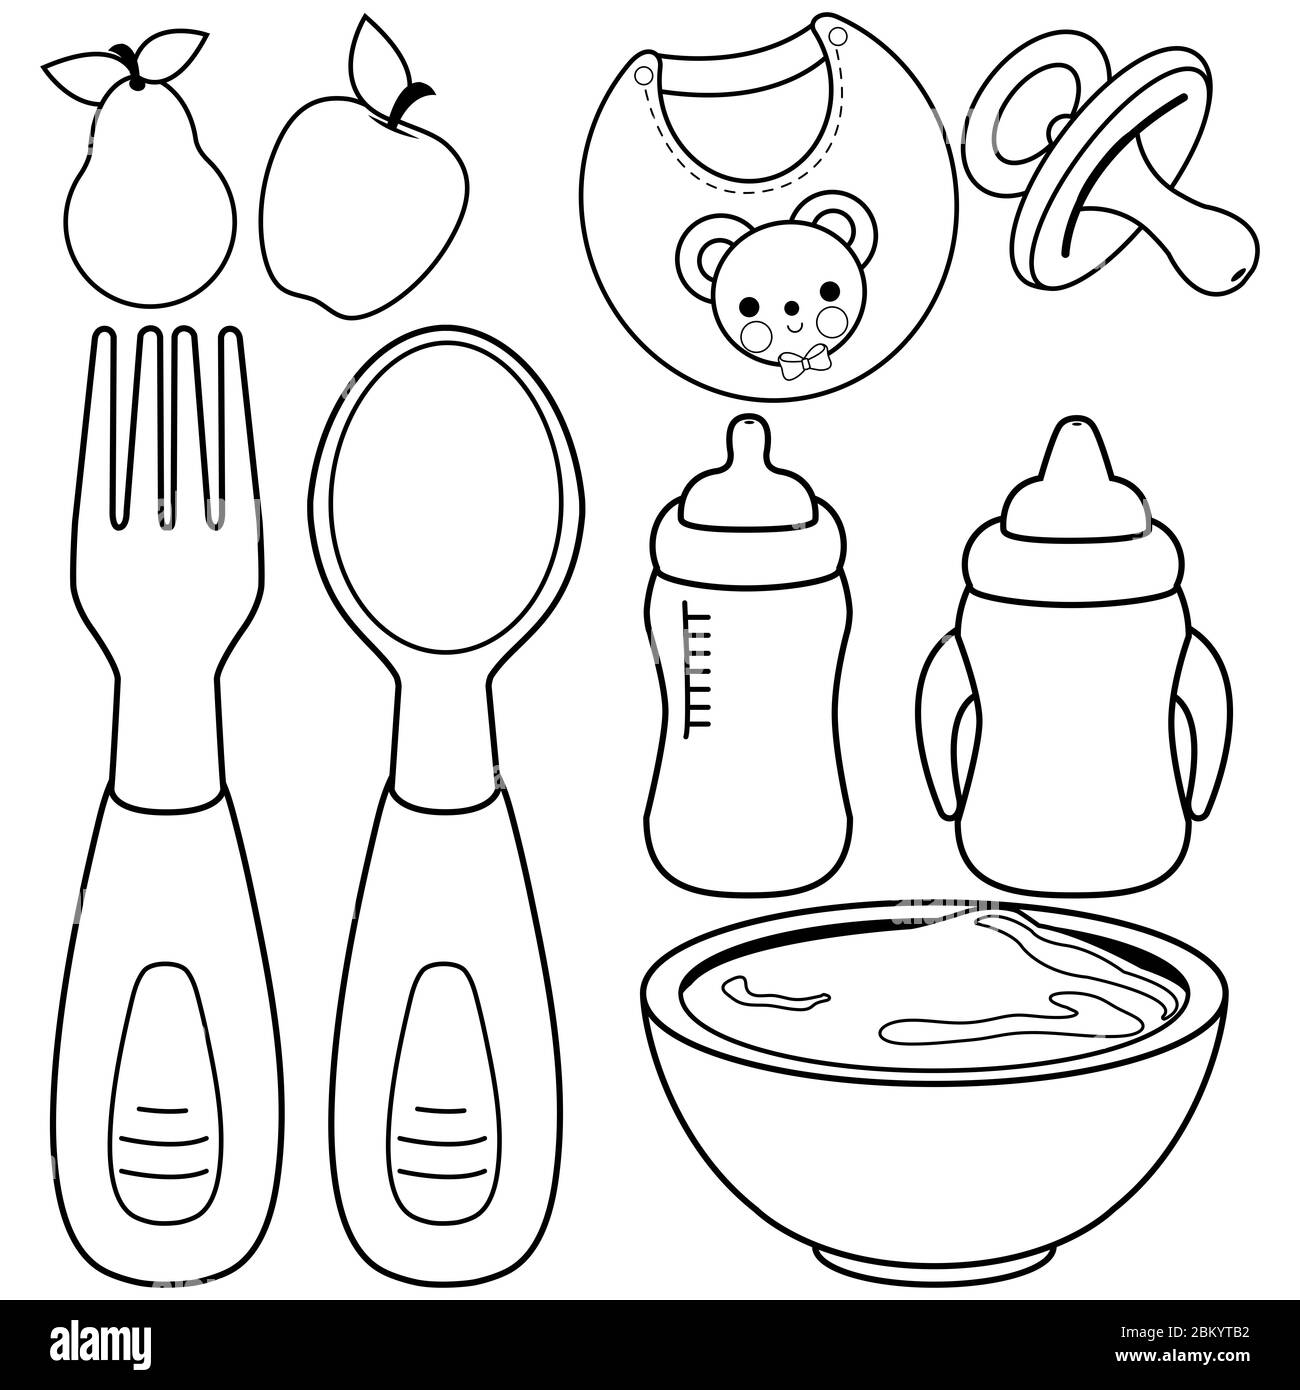 Baby food tableware set. Black and white coloring book page Stock Photo